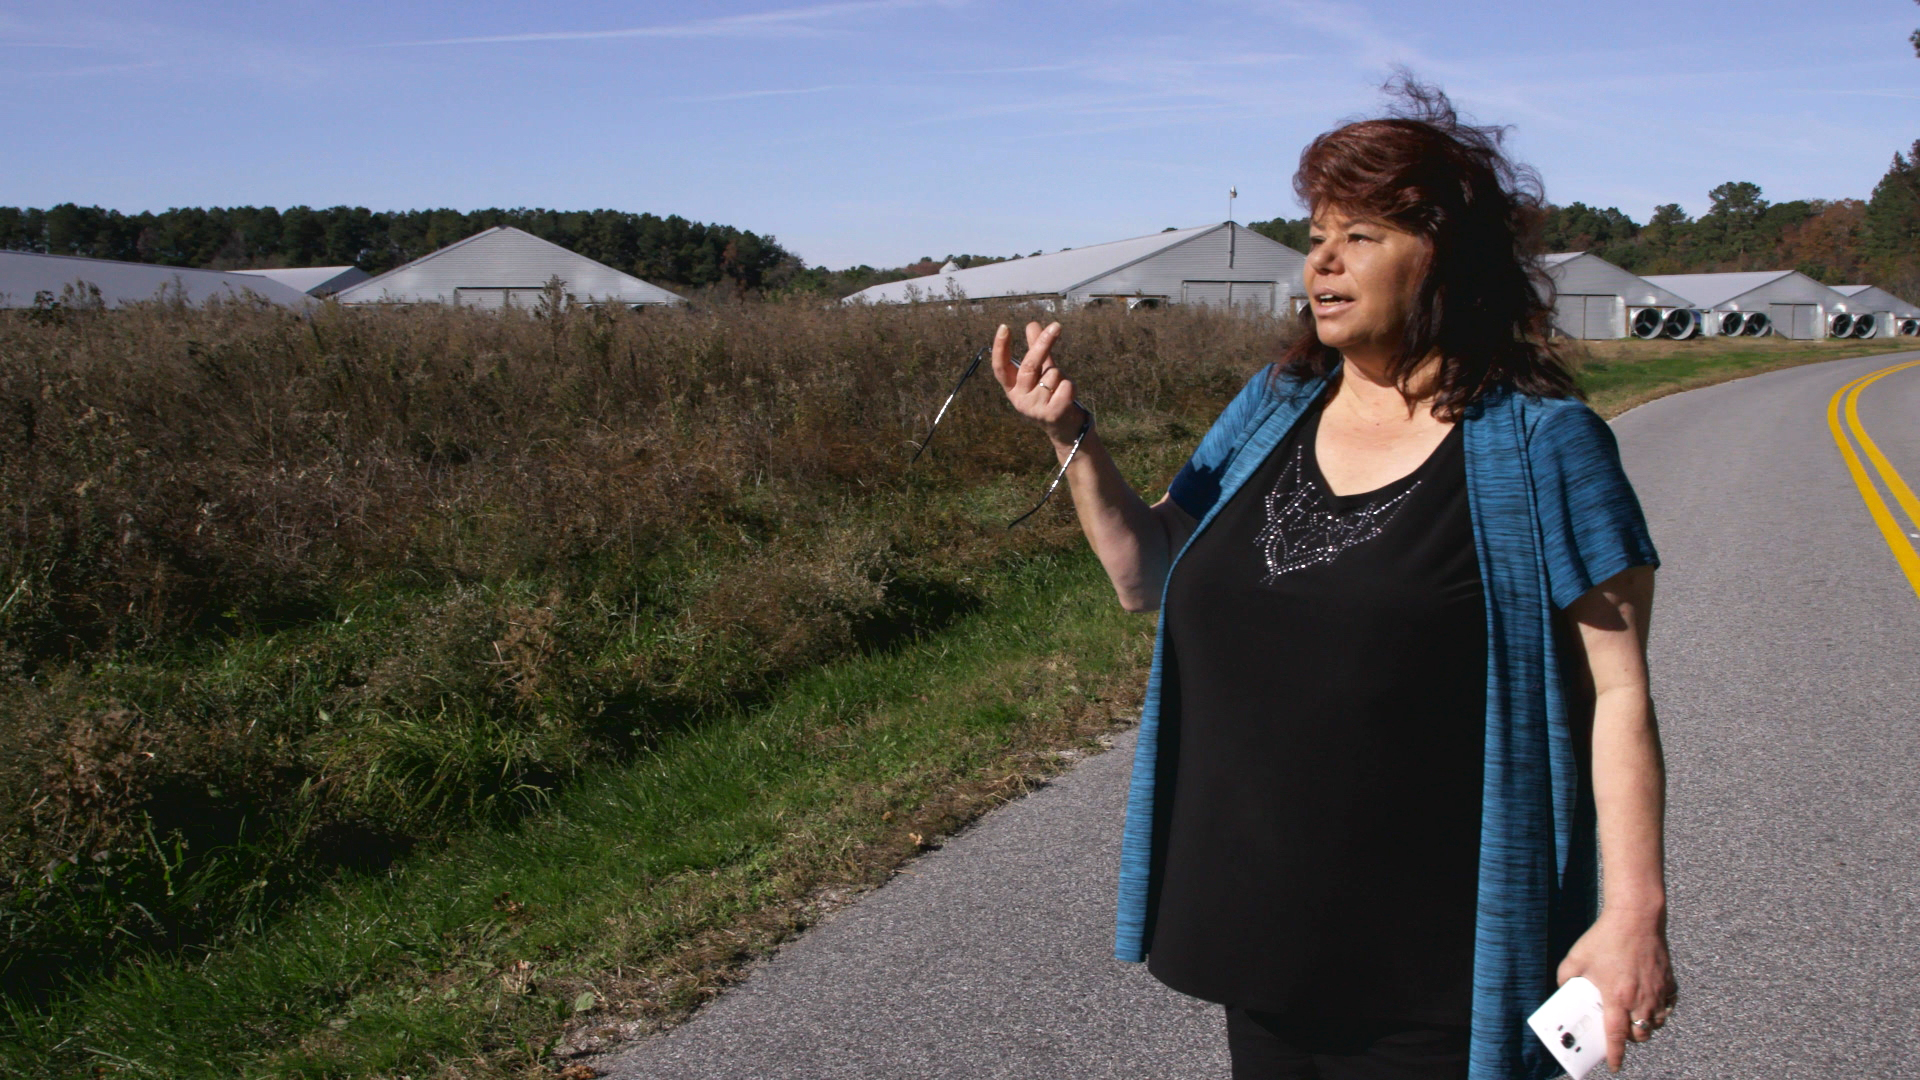 A woman with brown hair, a blue jacket, and a black shirt stands next a field on a country road.